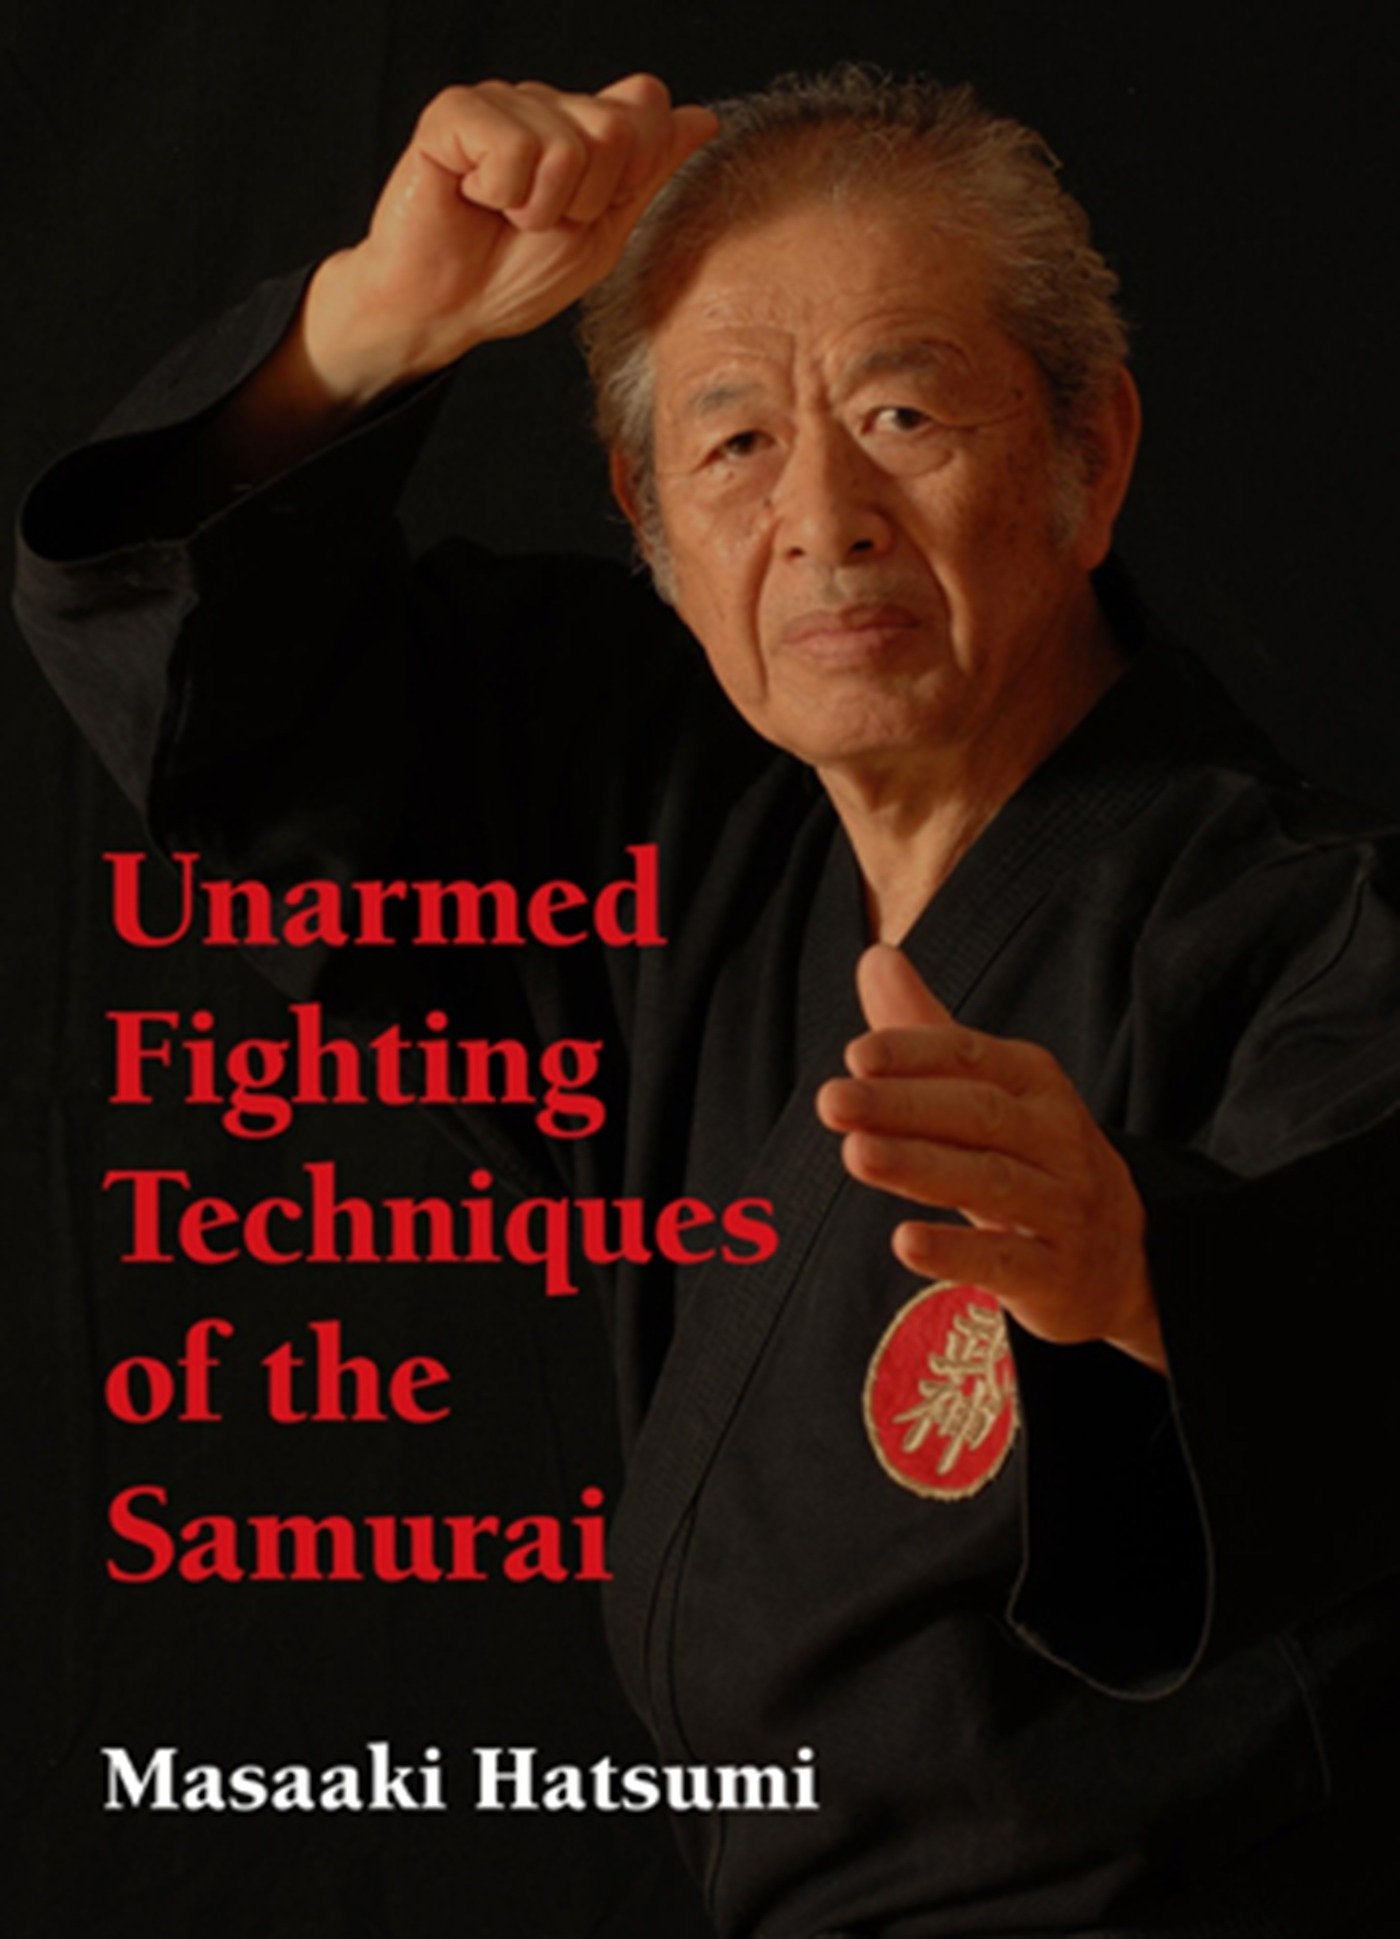 Unarmed Fighting Techniques of the Samurai Book by Masaaki Hatsumi (Hardcover) (Preowned) - Budovideos Inc